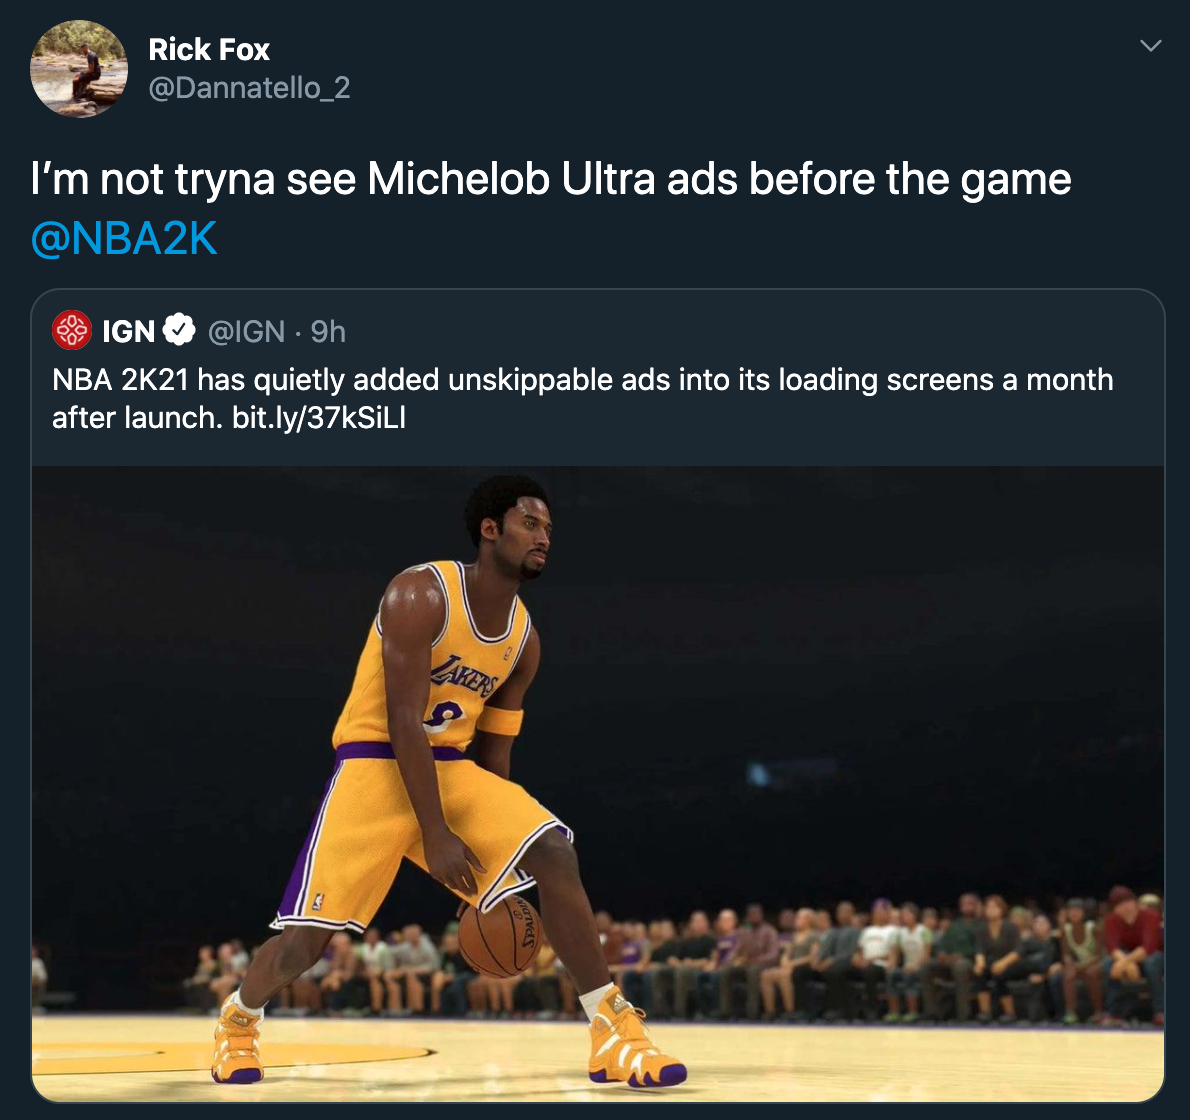 I'm not tryna see Michelob Ultra ads before the game - Nba 2K21 has quietly added unskippable ads into its loading screens a month after launch.